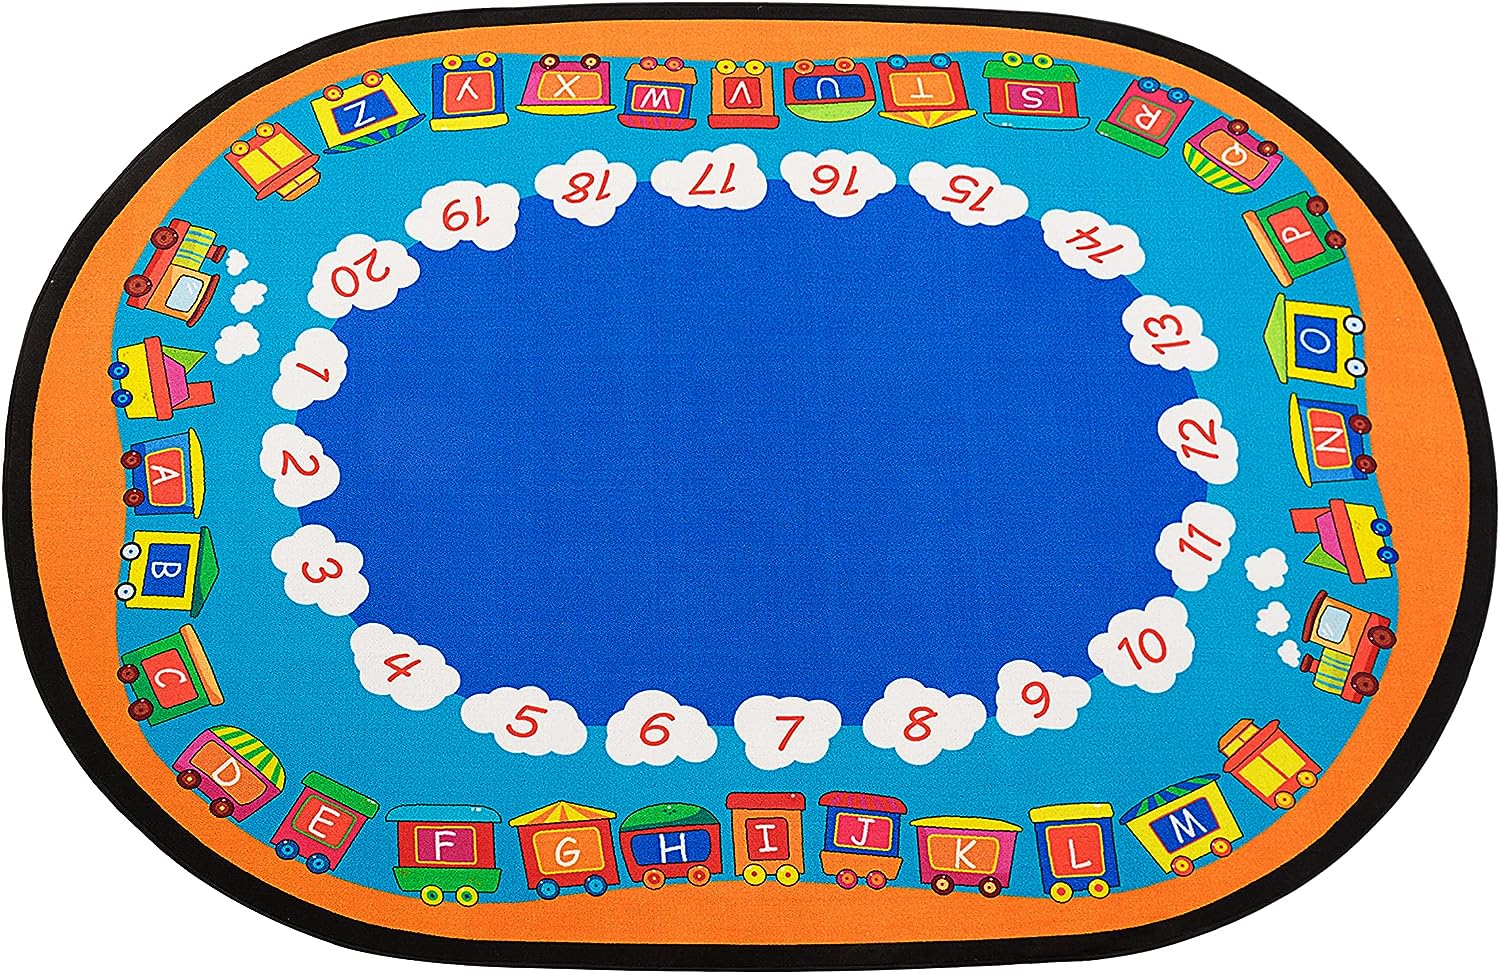 8‘5"x6'5" Oval Elementary Classroom Rugs for Home Learning Area